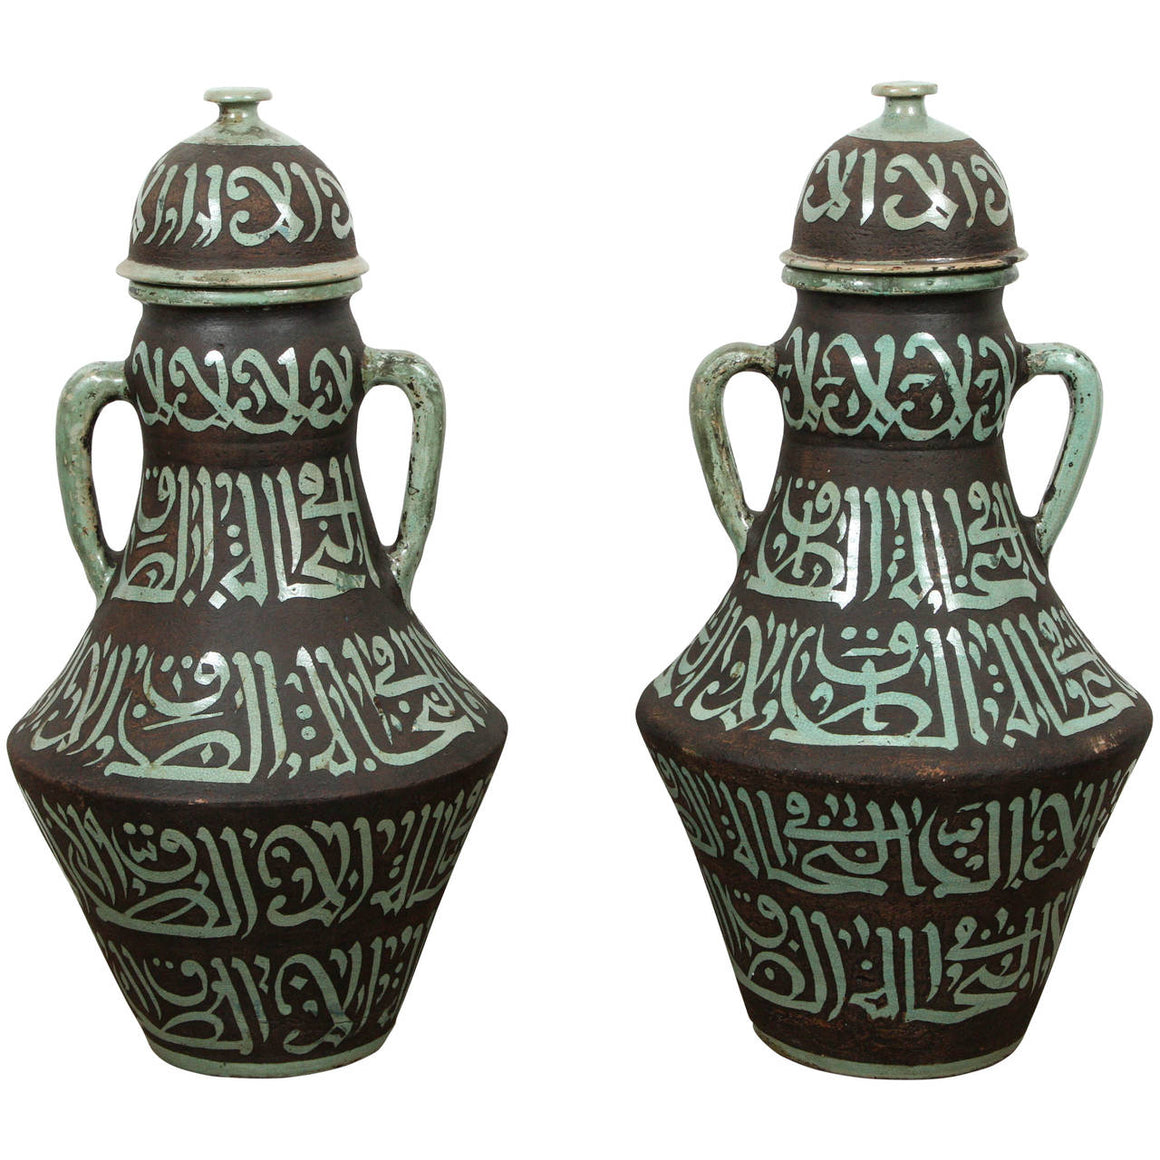 Pair of Moroccan Green and Brown Chiselled Ceramic Urns with Handles